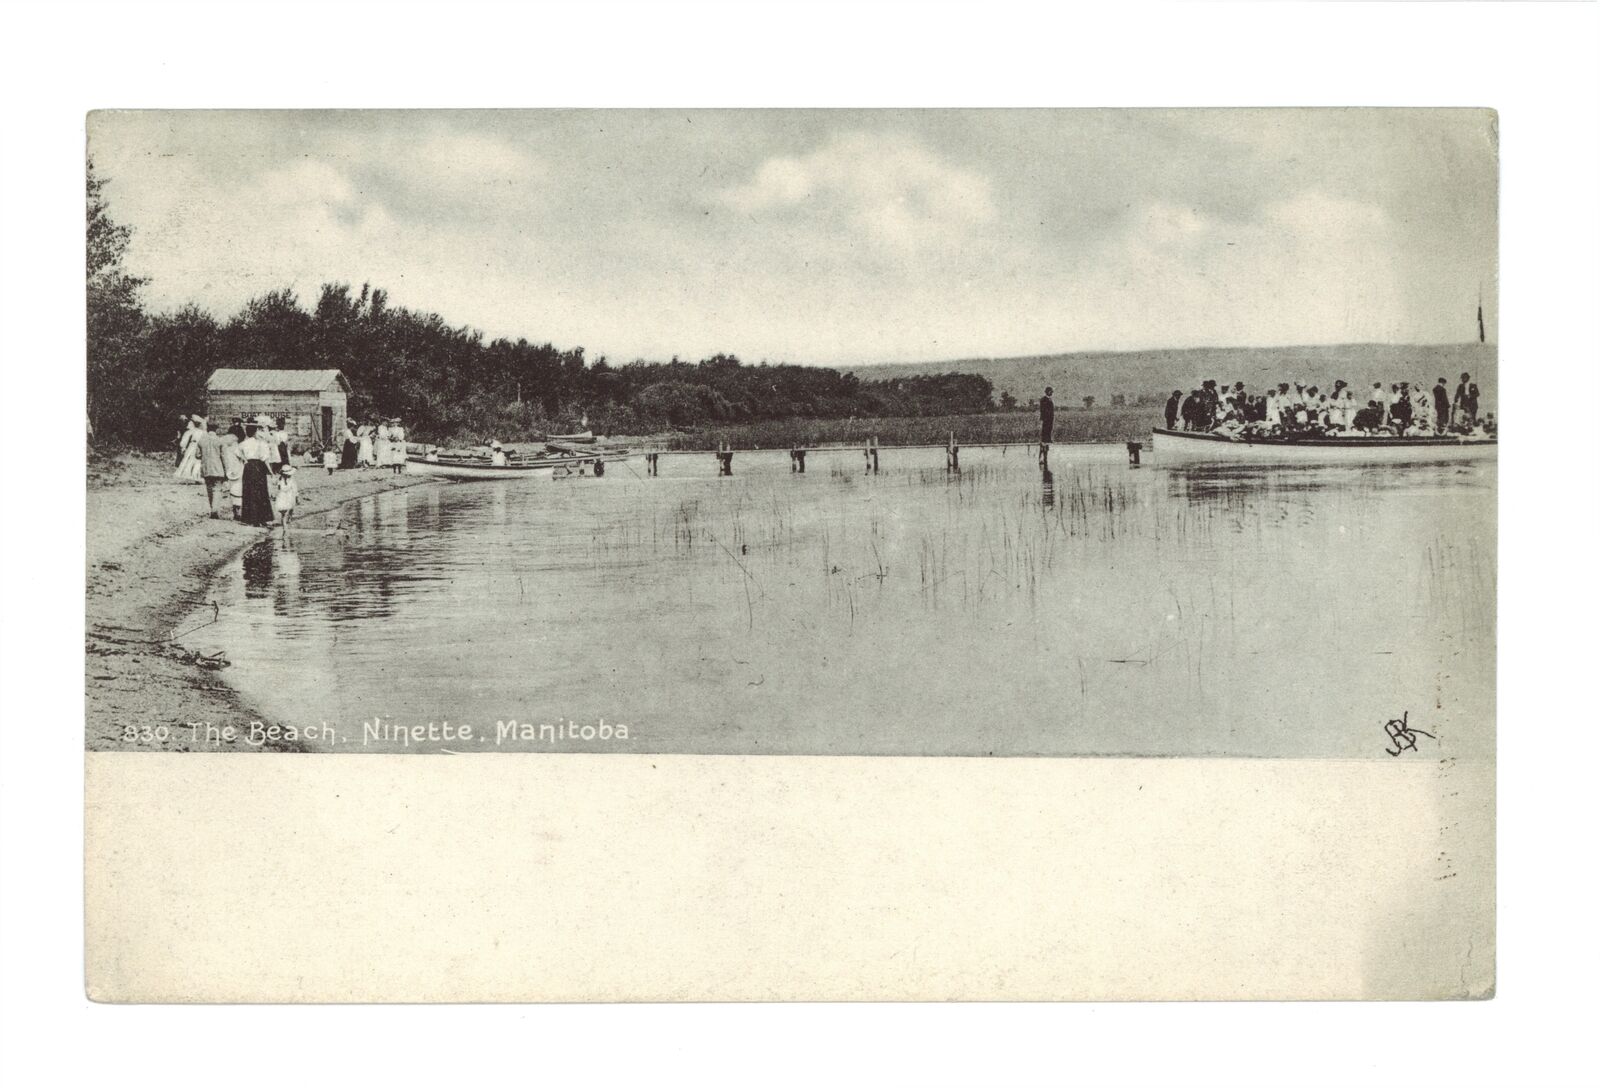 The beach Ninette Manitoba - Image shows a crowd of people loading- Old Photo